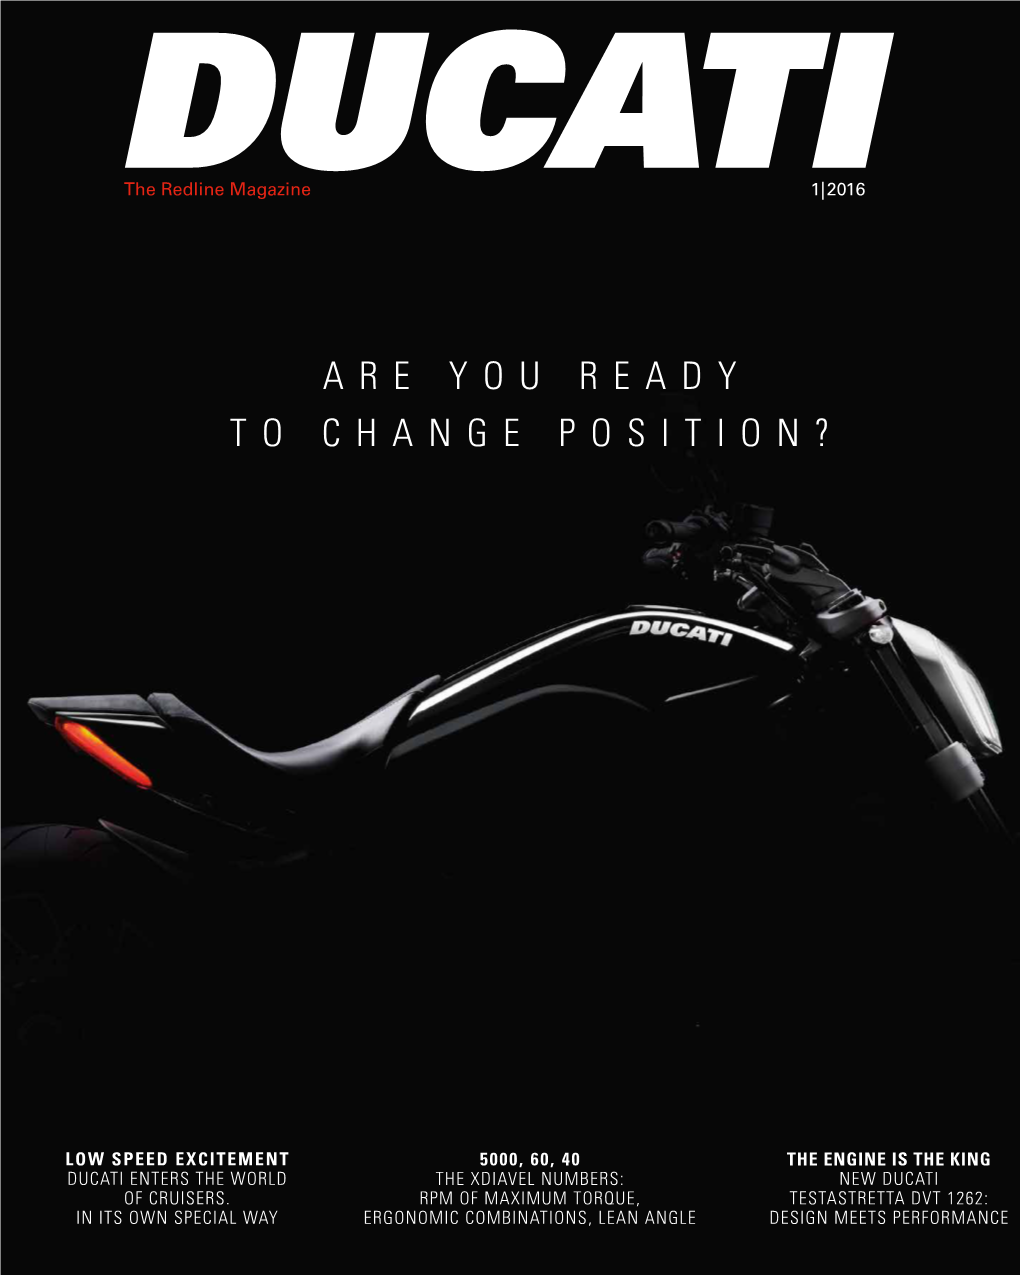 Are You Ready to Change Position?